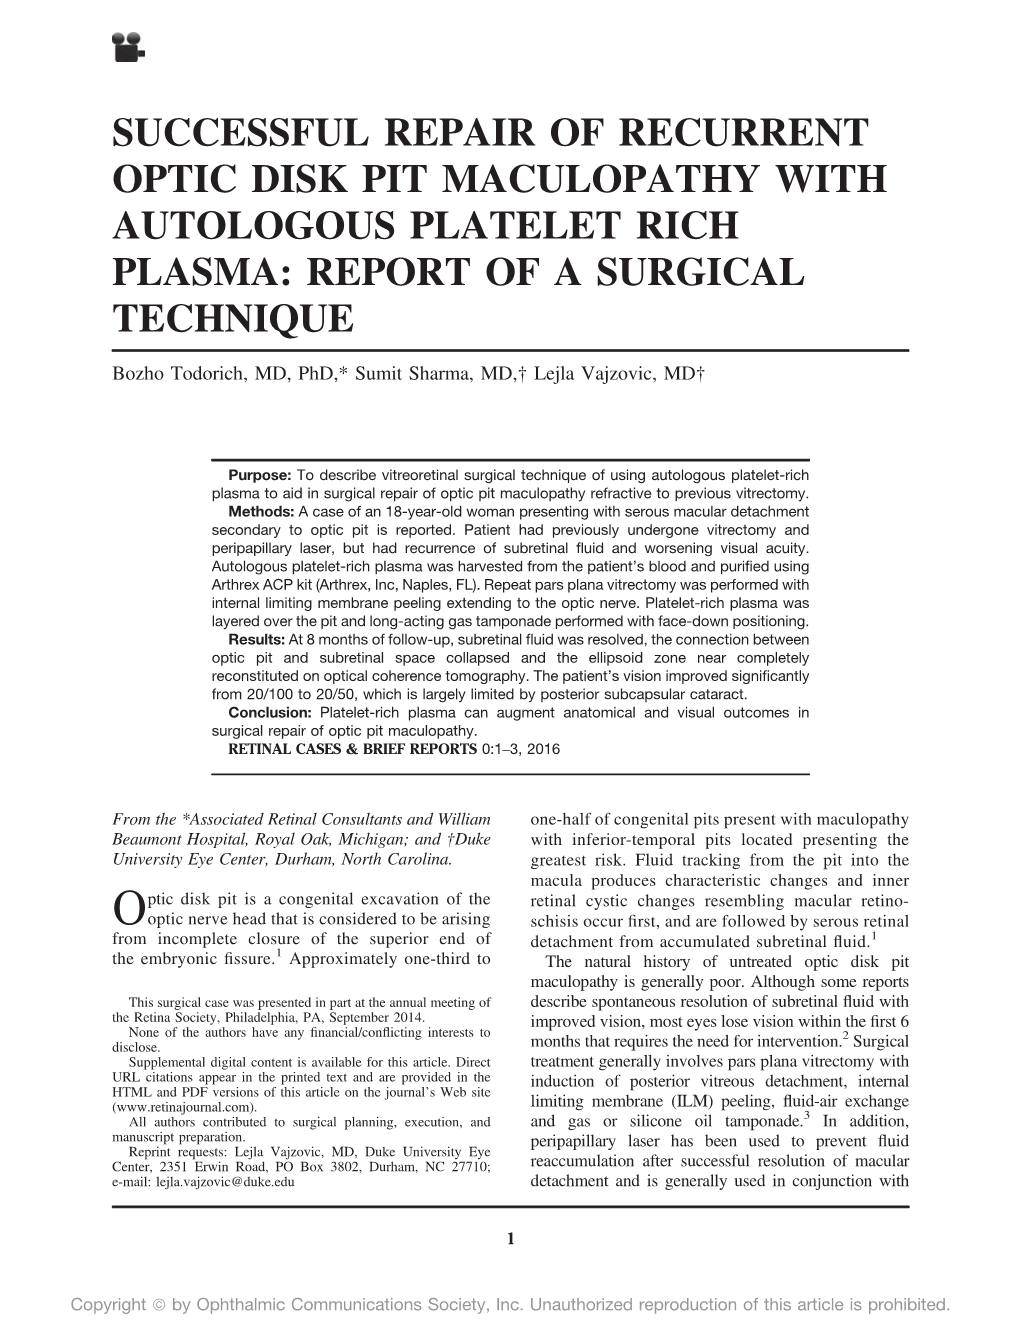 Successful Repair of Recurrent Optic Disk Pit Maculopathy with Autologous Platelet Rich Plasma: Report of a Surgical Technique